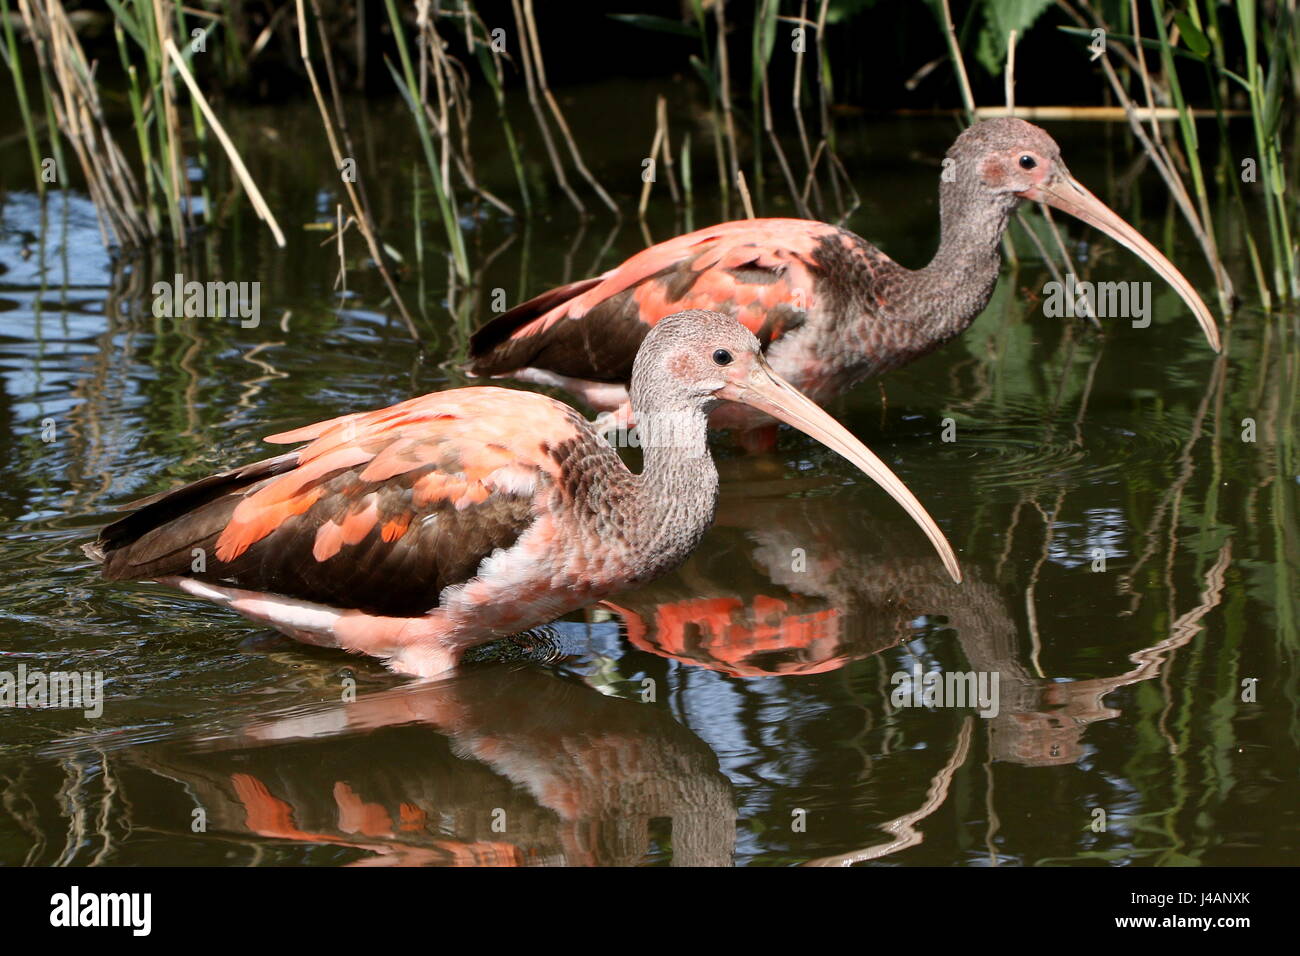 Two immature South Americam Scarlet Ibises (Eudocimus ruber) foraging in a lake, still showing transition plumage. Stock Photo